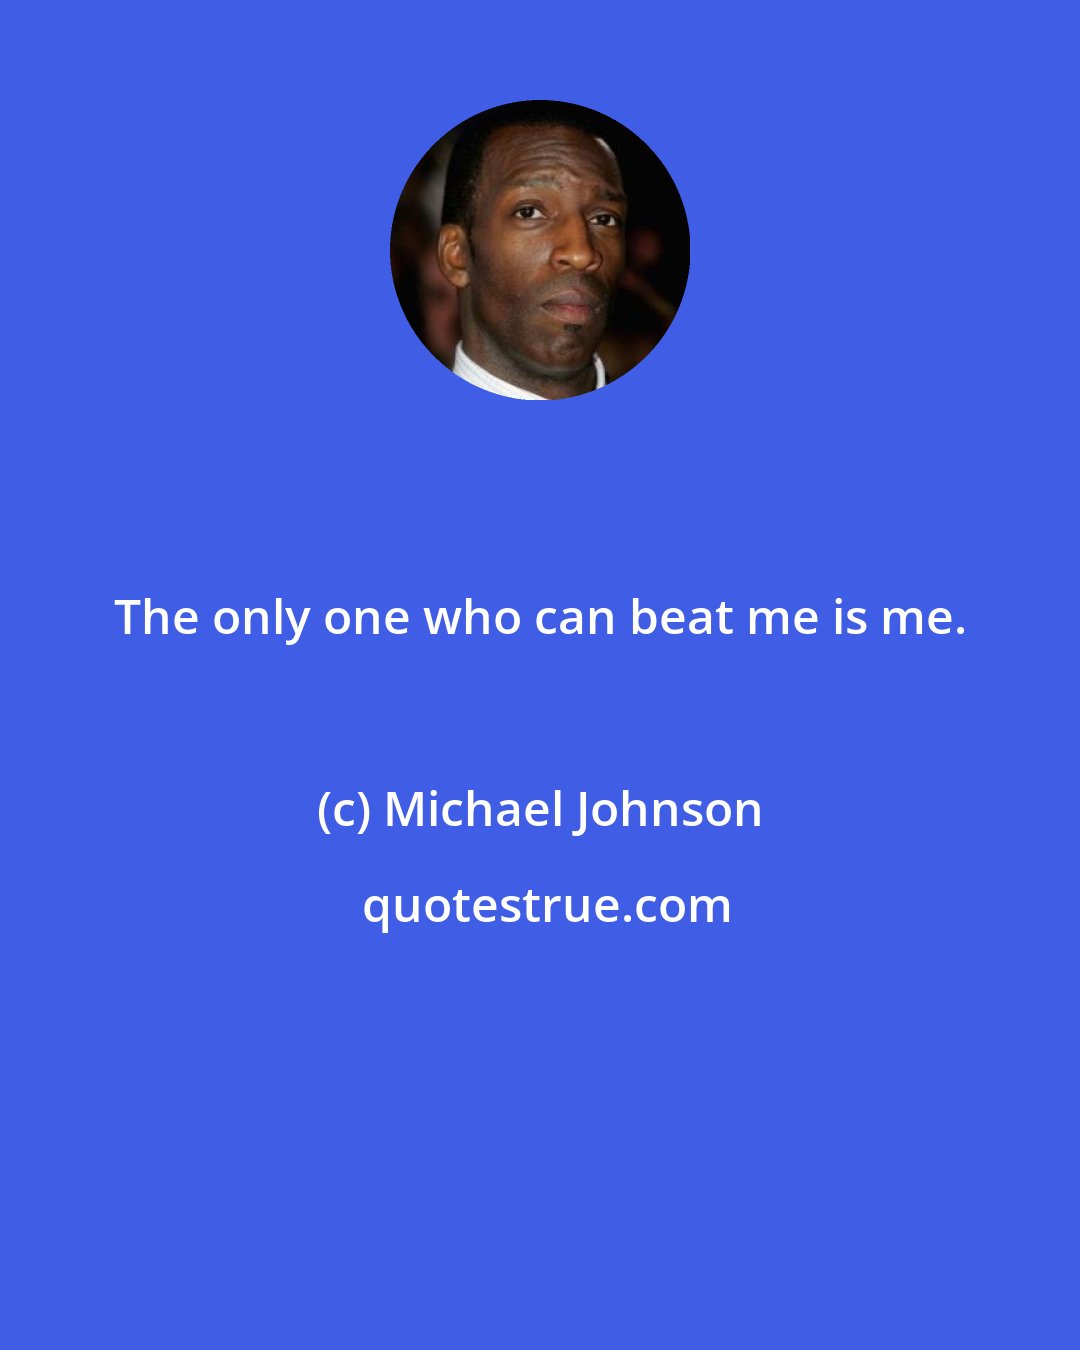 Michael Johnson: The only one who can beat me is me.